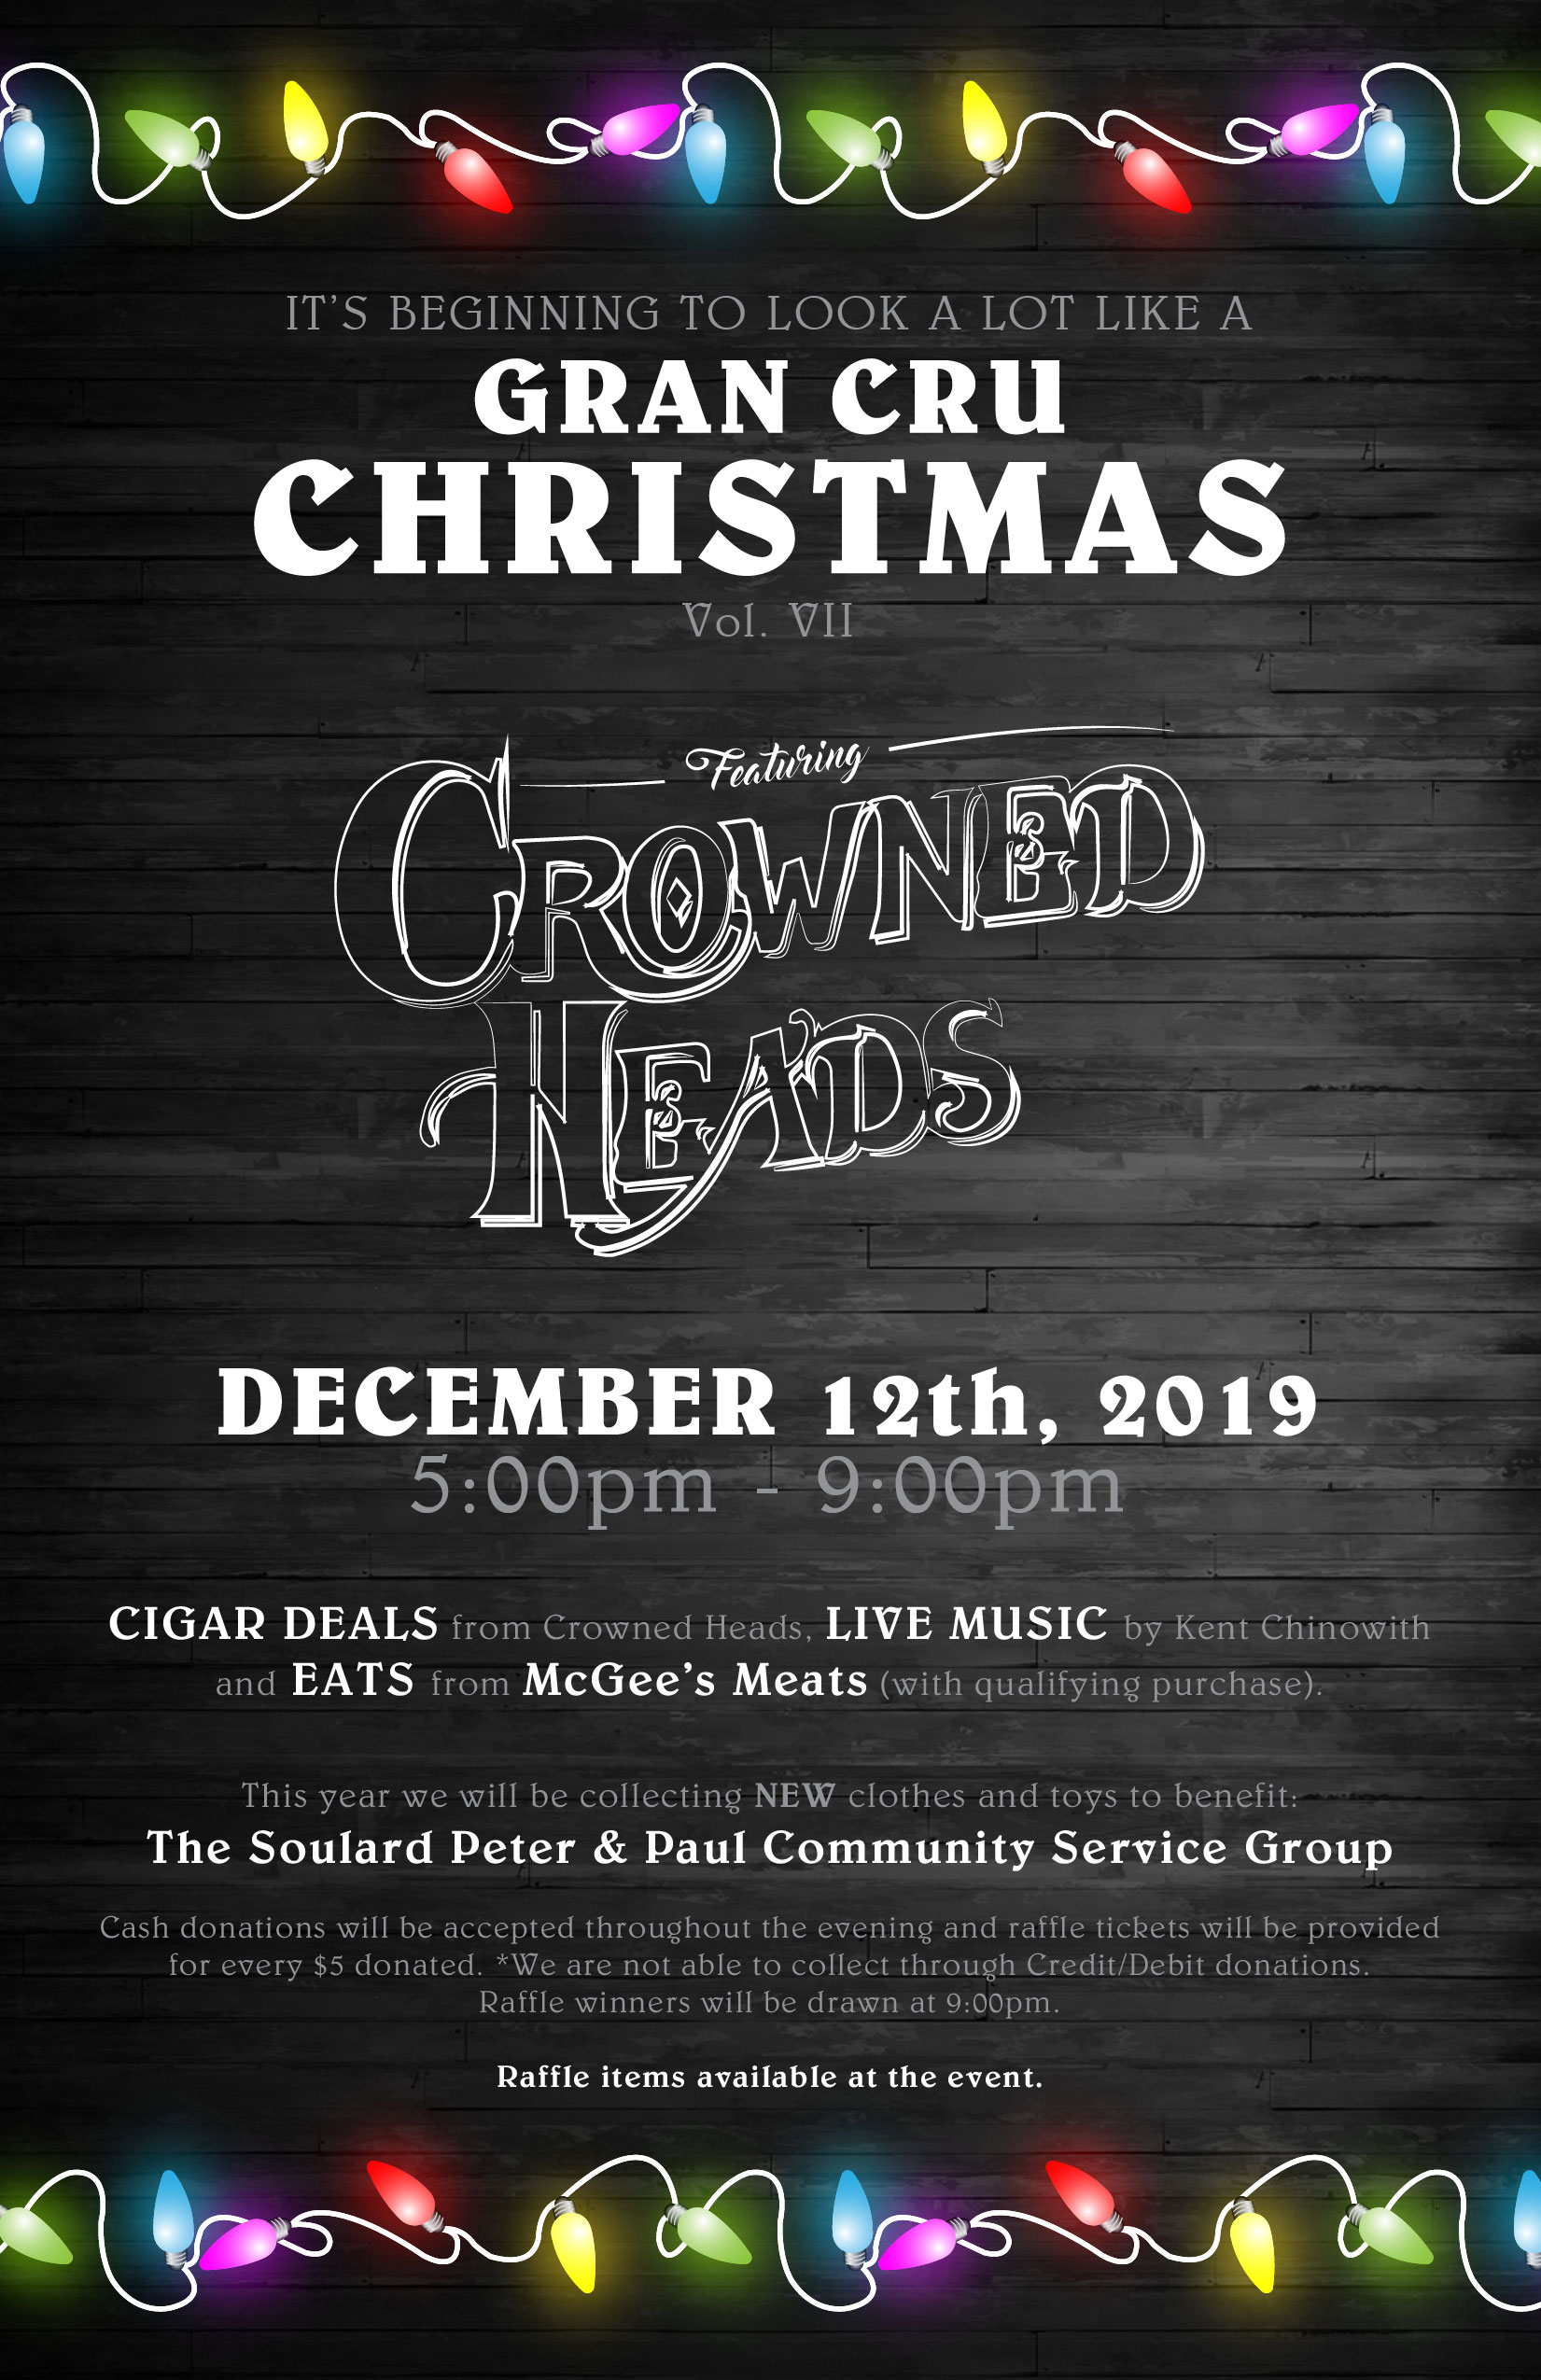 Christmas with Crowned Heads